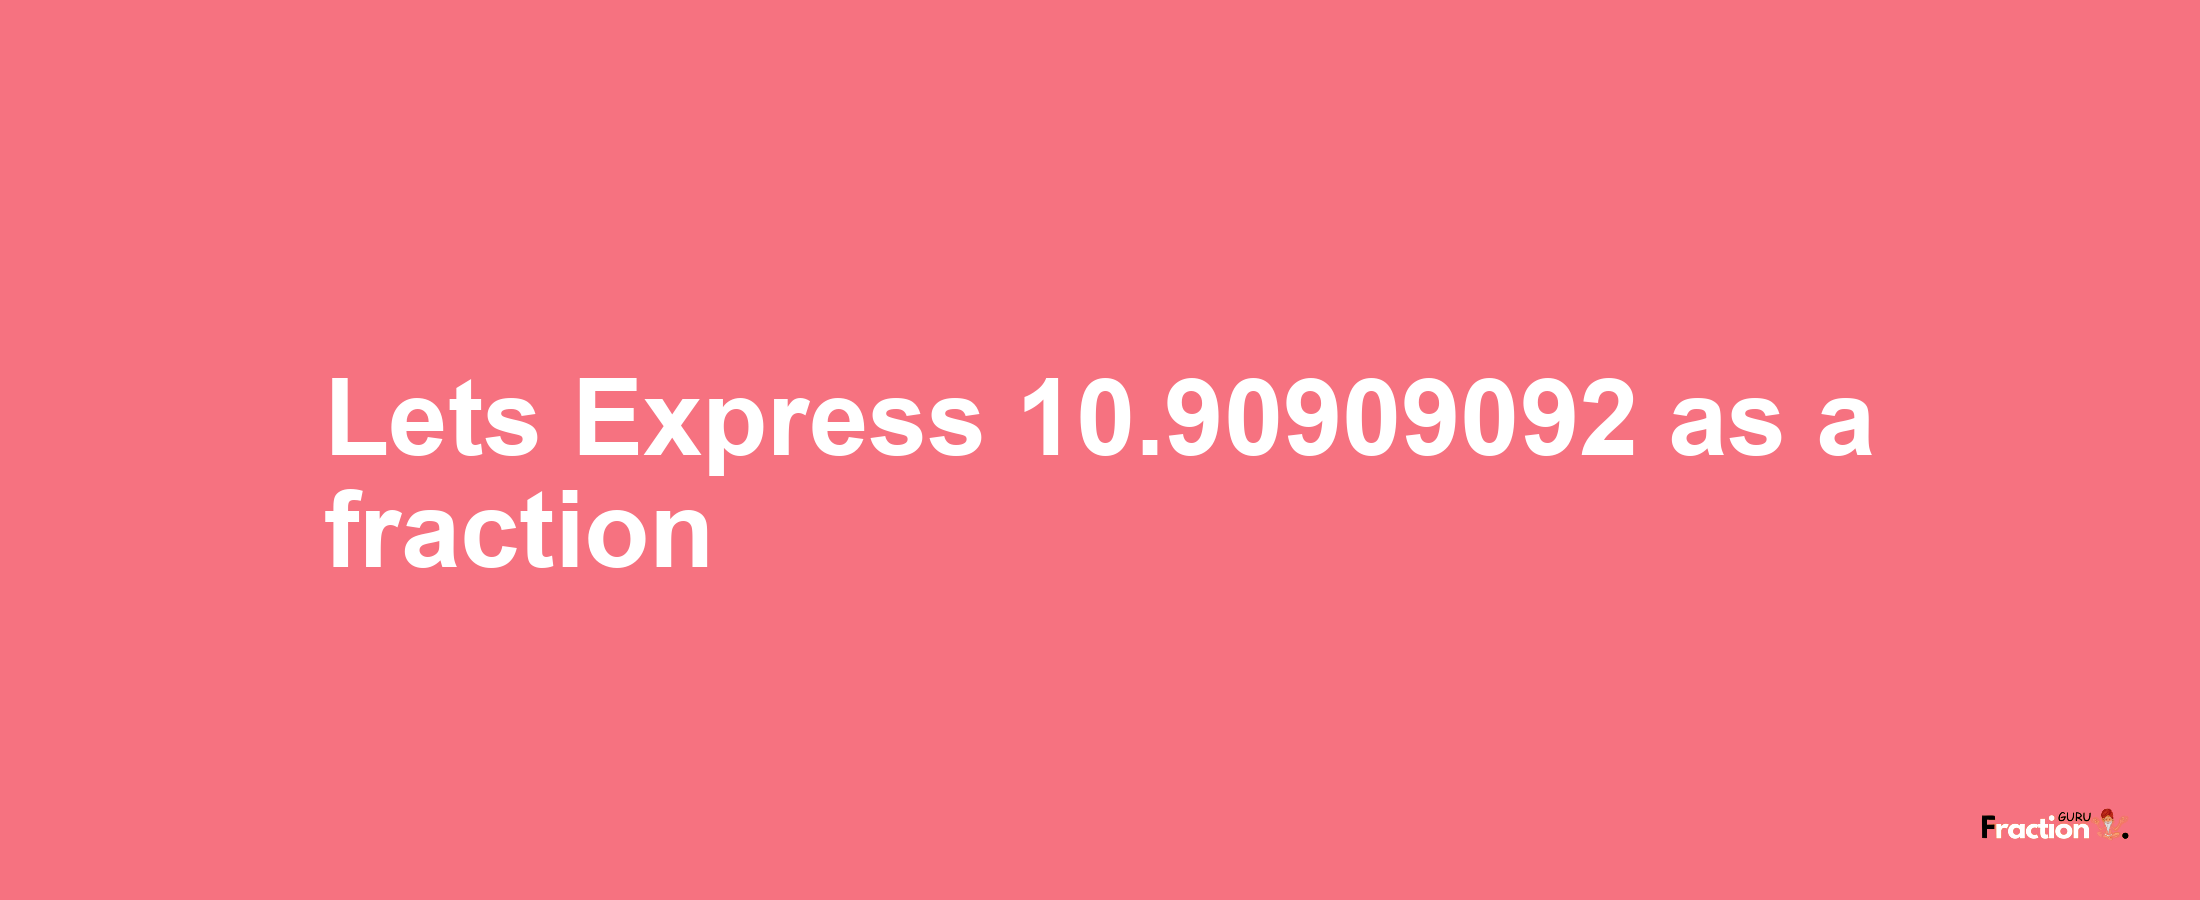 Lets Express 10.90909092 as afraction